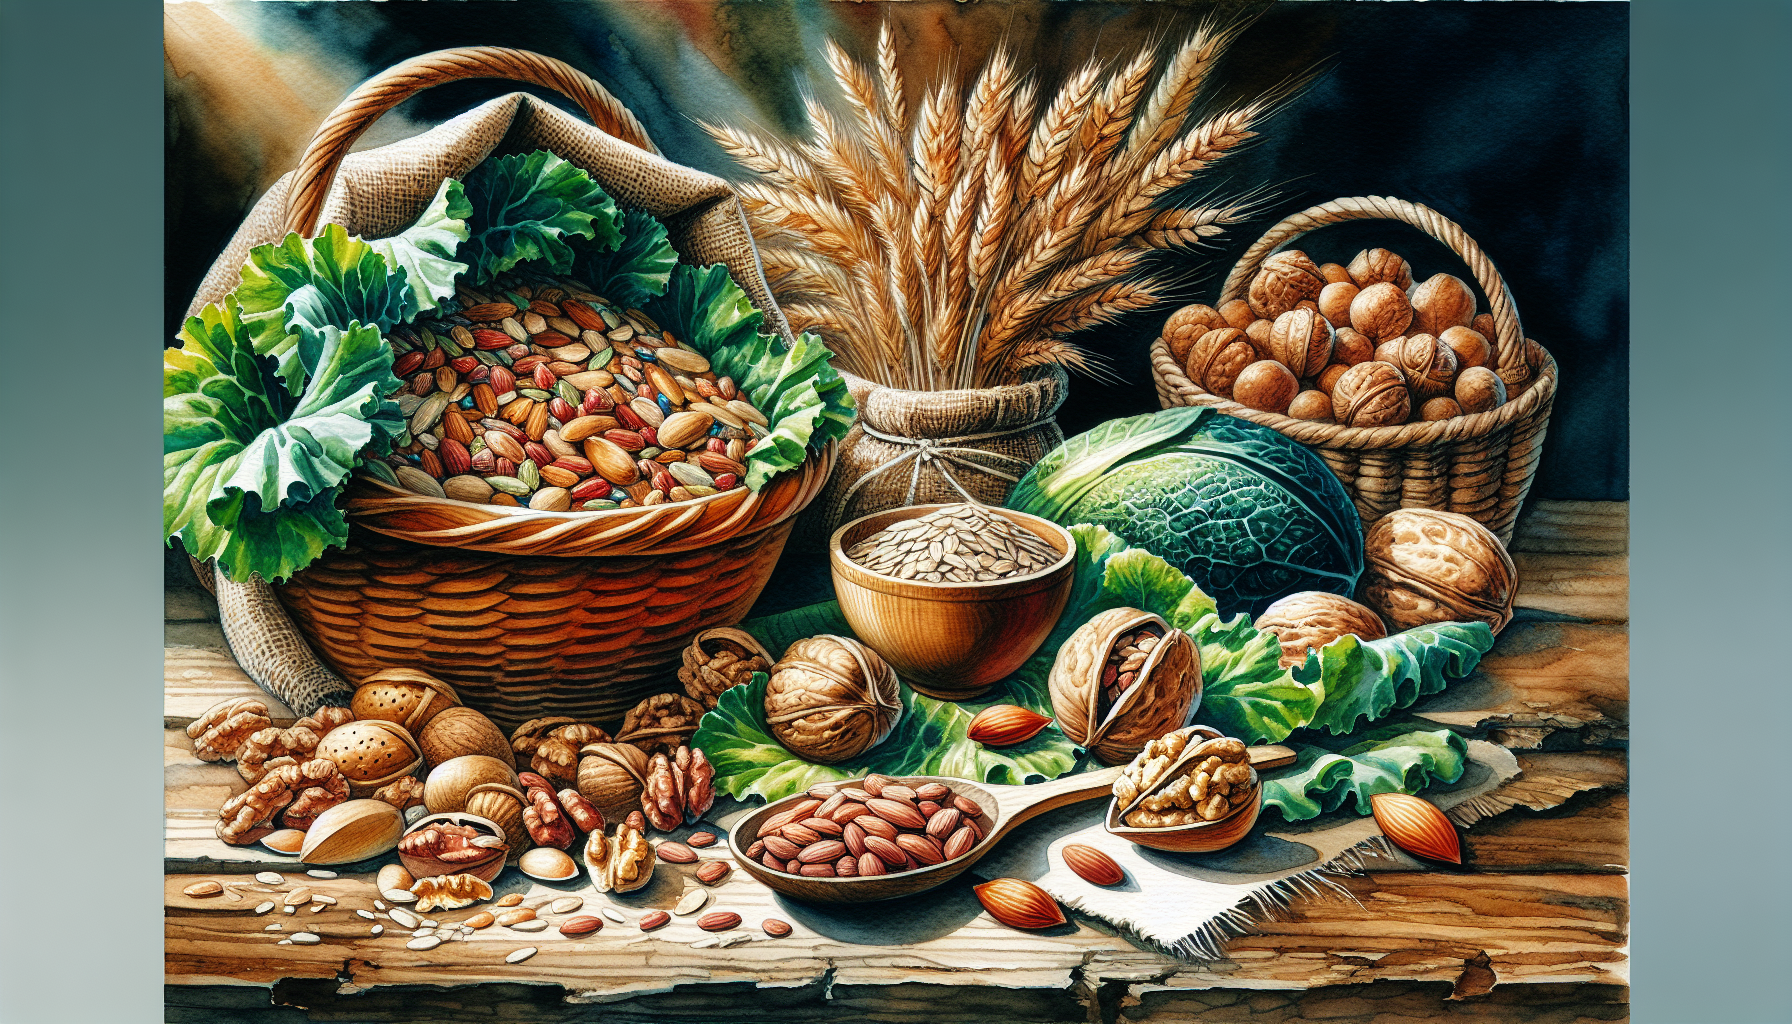 Watercolor painting of magnesium-rich foods